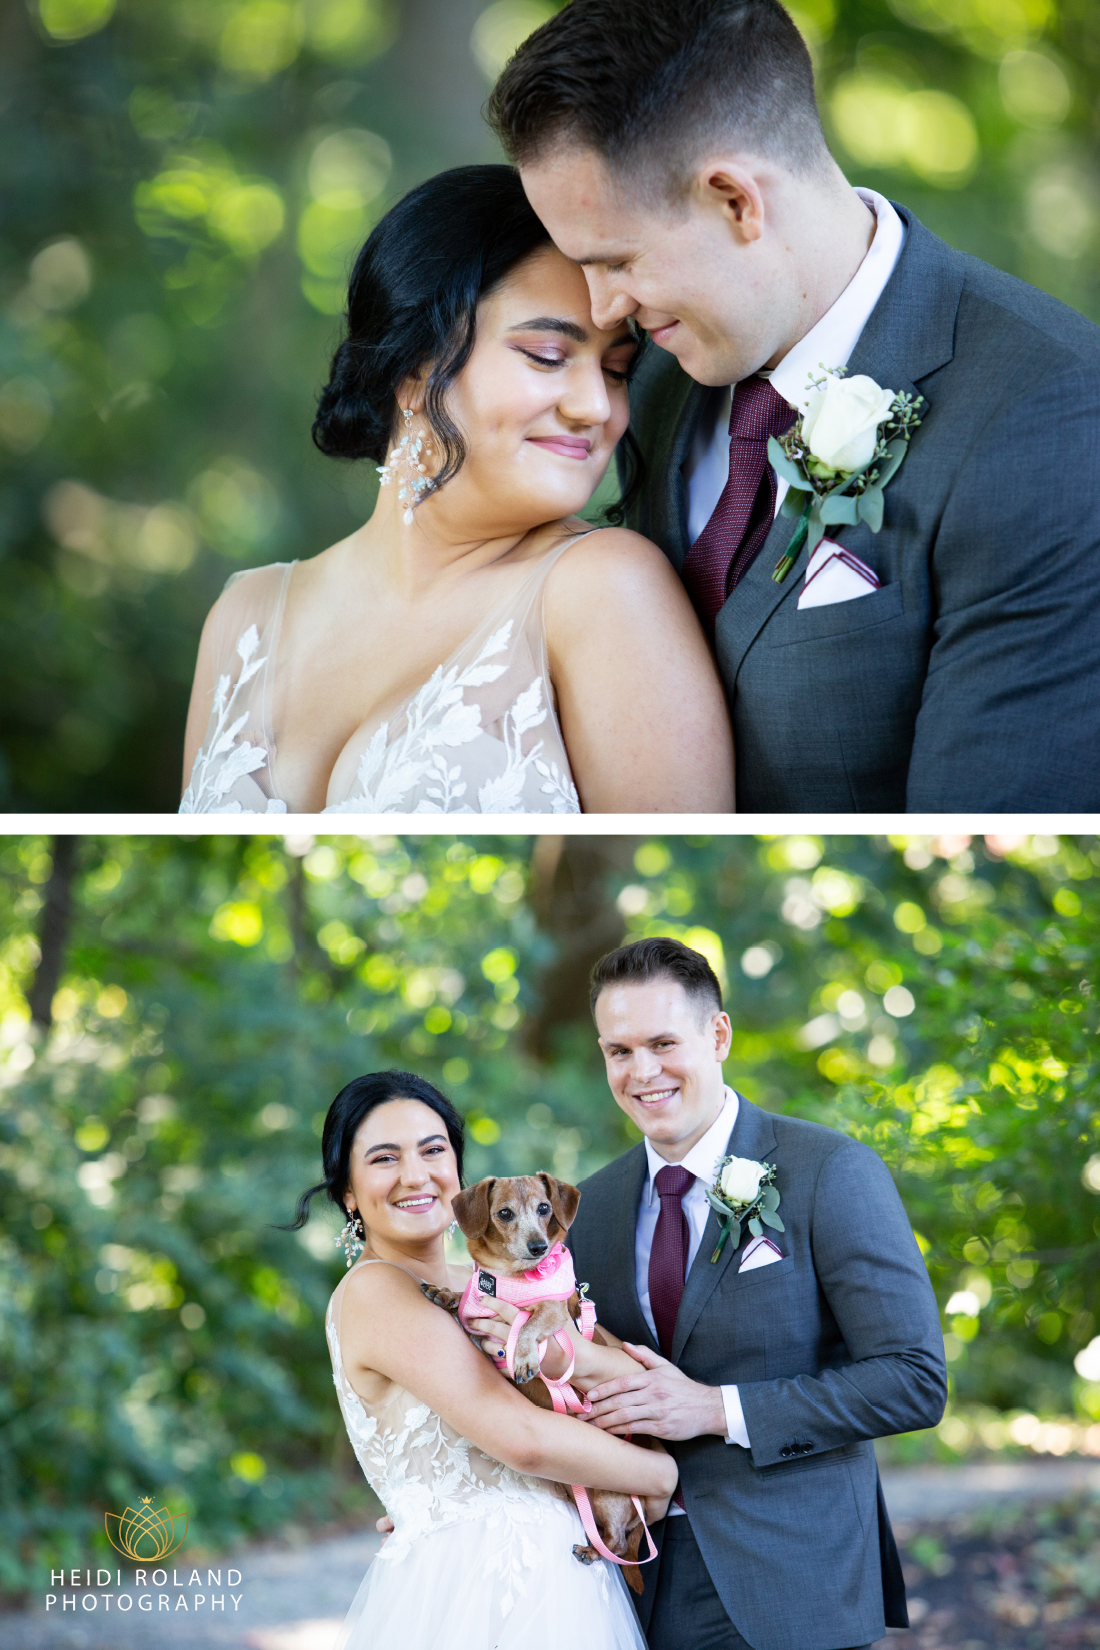 Bride and groom with dog by Heidi Roland Photography